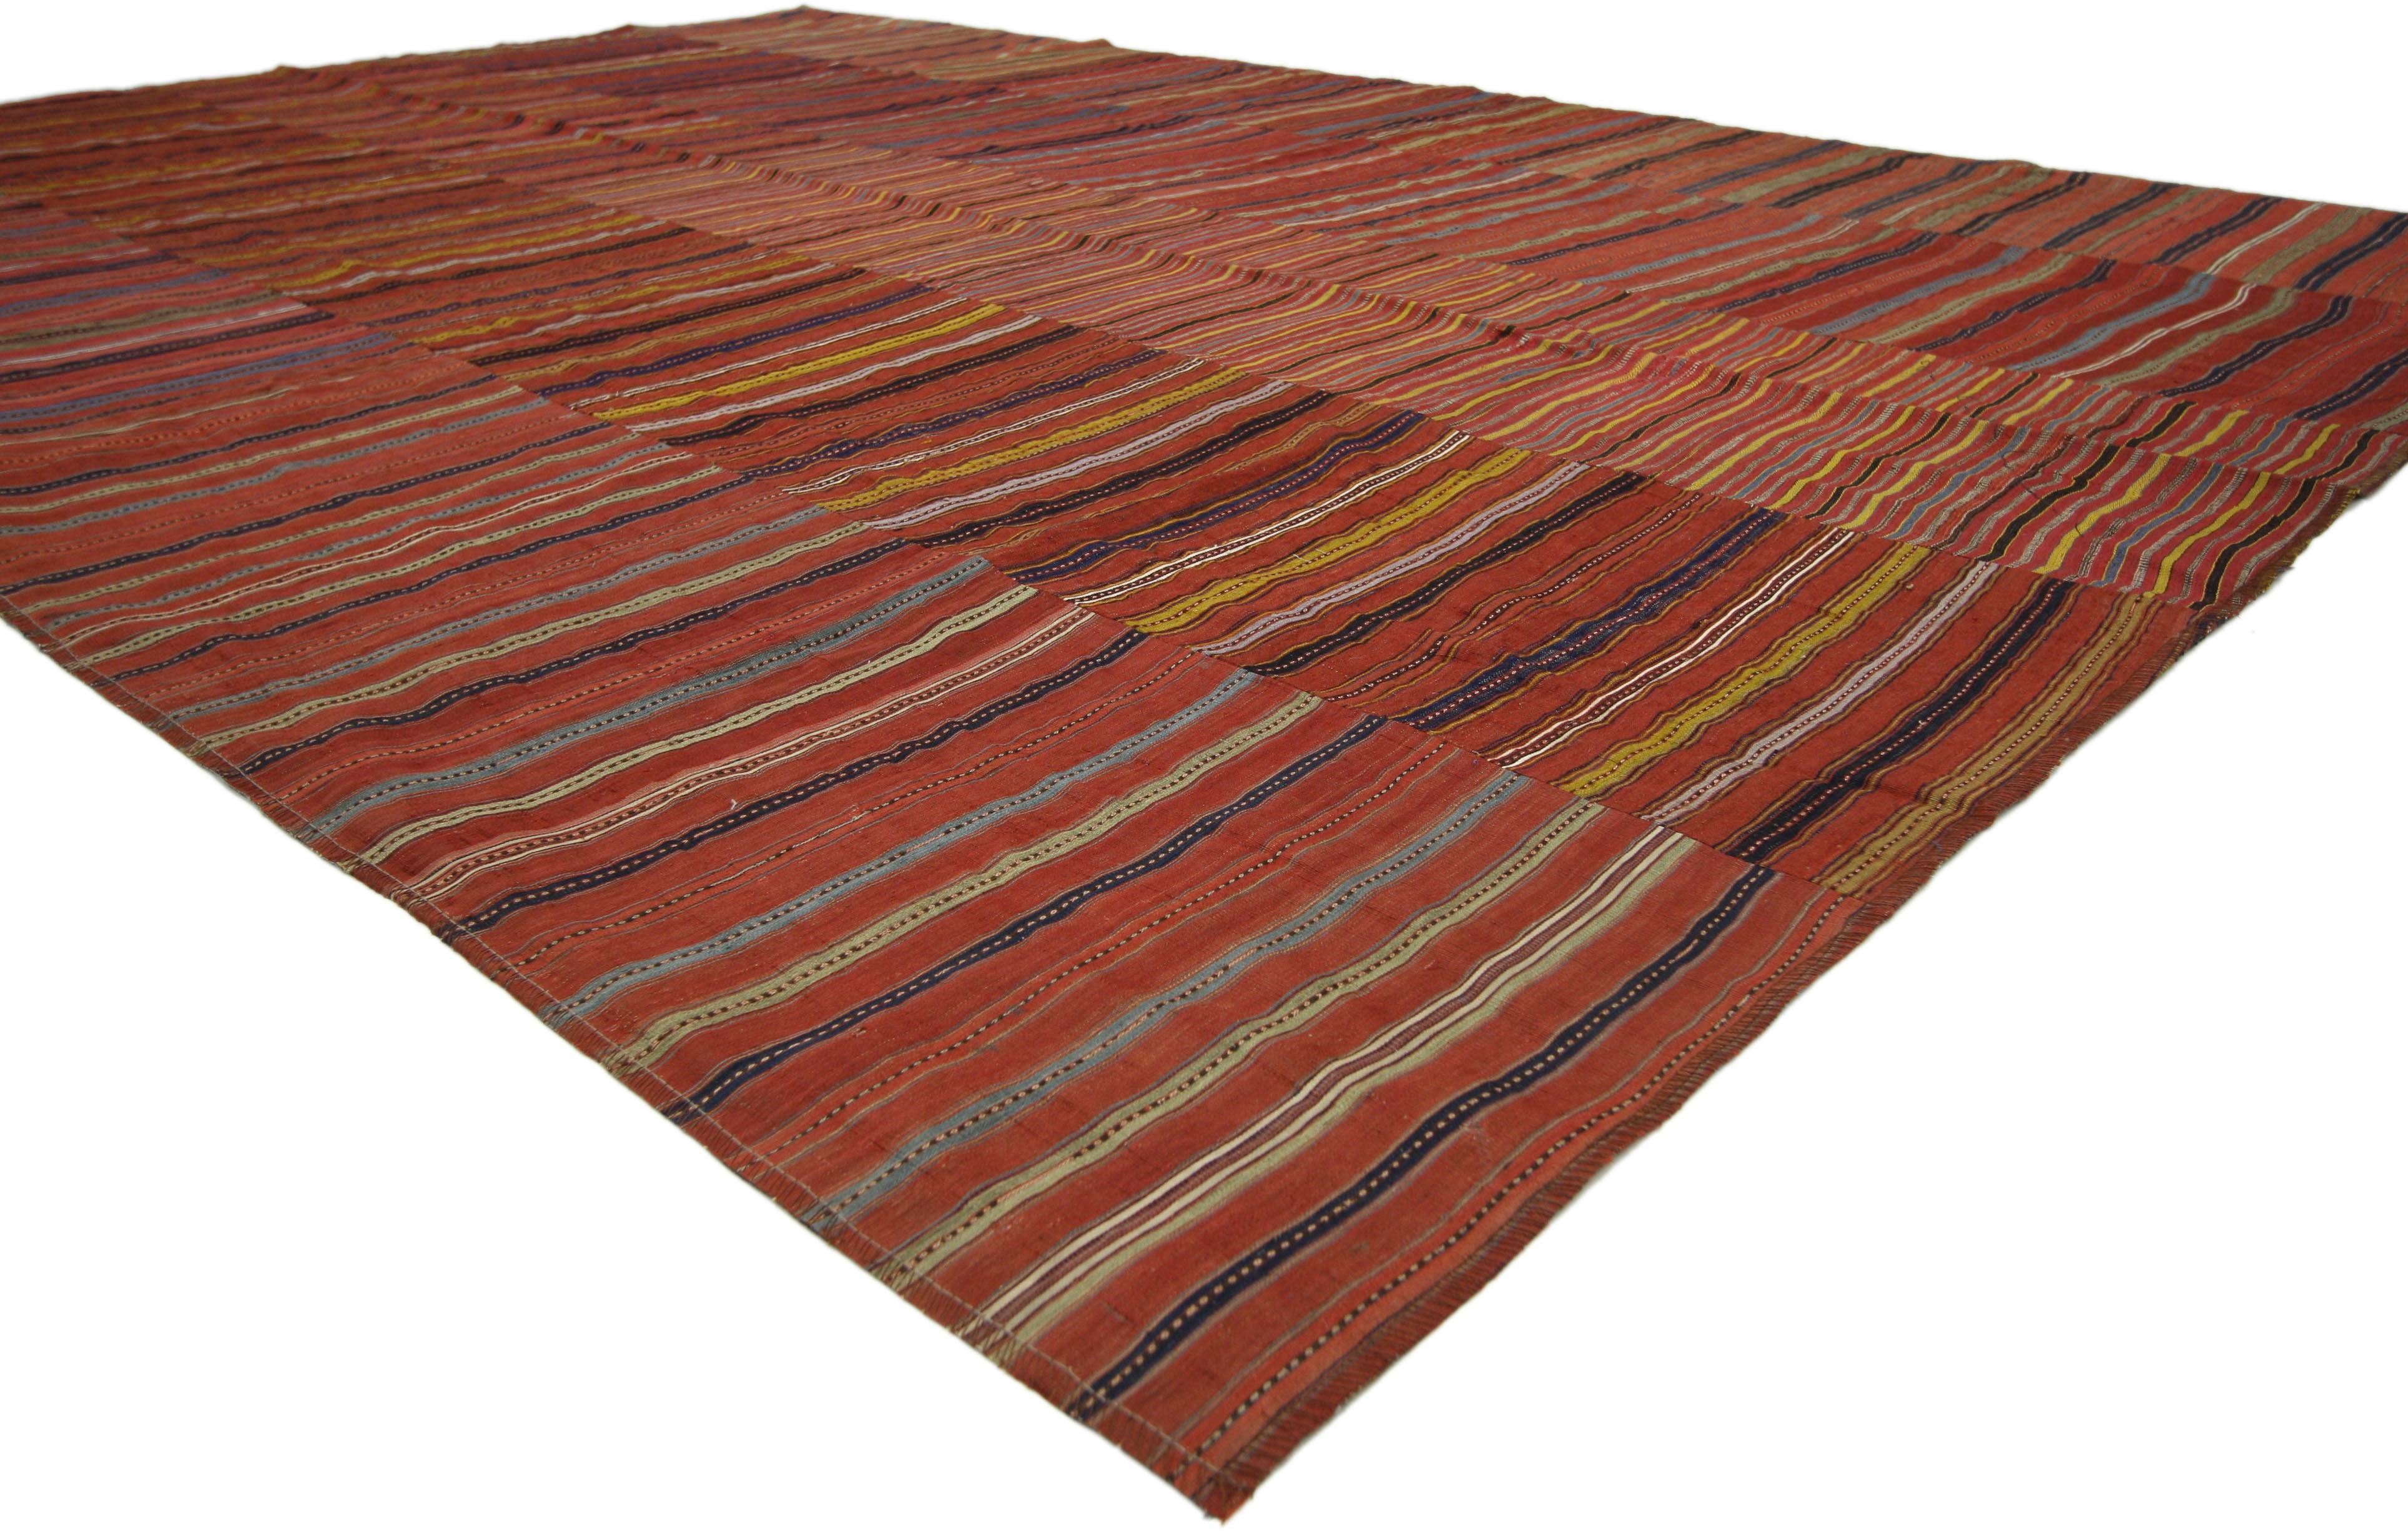 60653 Distressed Vintage Turkish Kilim Rug with Bayadere Stripes and Rustic Style, Striped Kilim Area Rug. This hand-woven wool distressed vintage Turkish kilim Jajim kilim rug features a variety of colorful Bayadere stripes composed of both wide